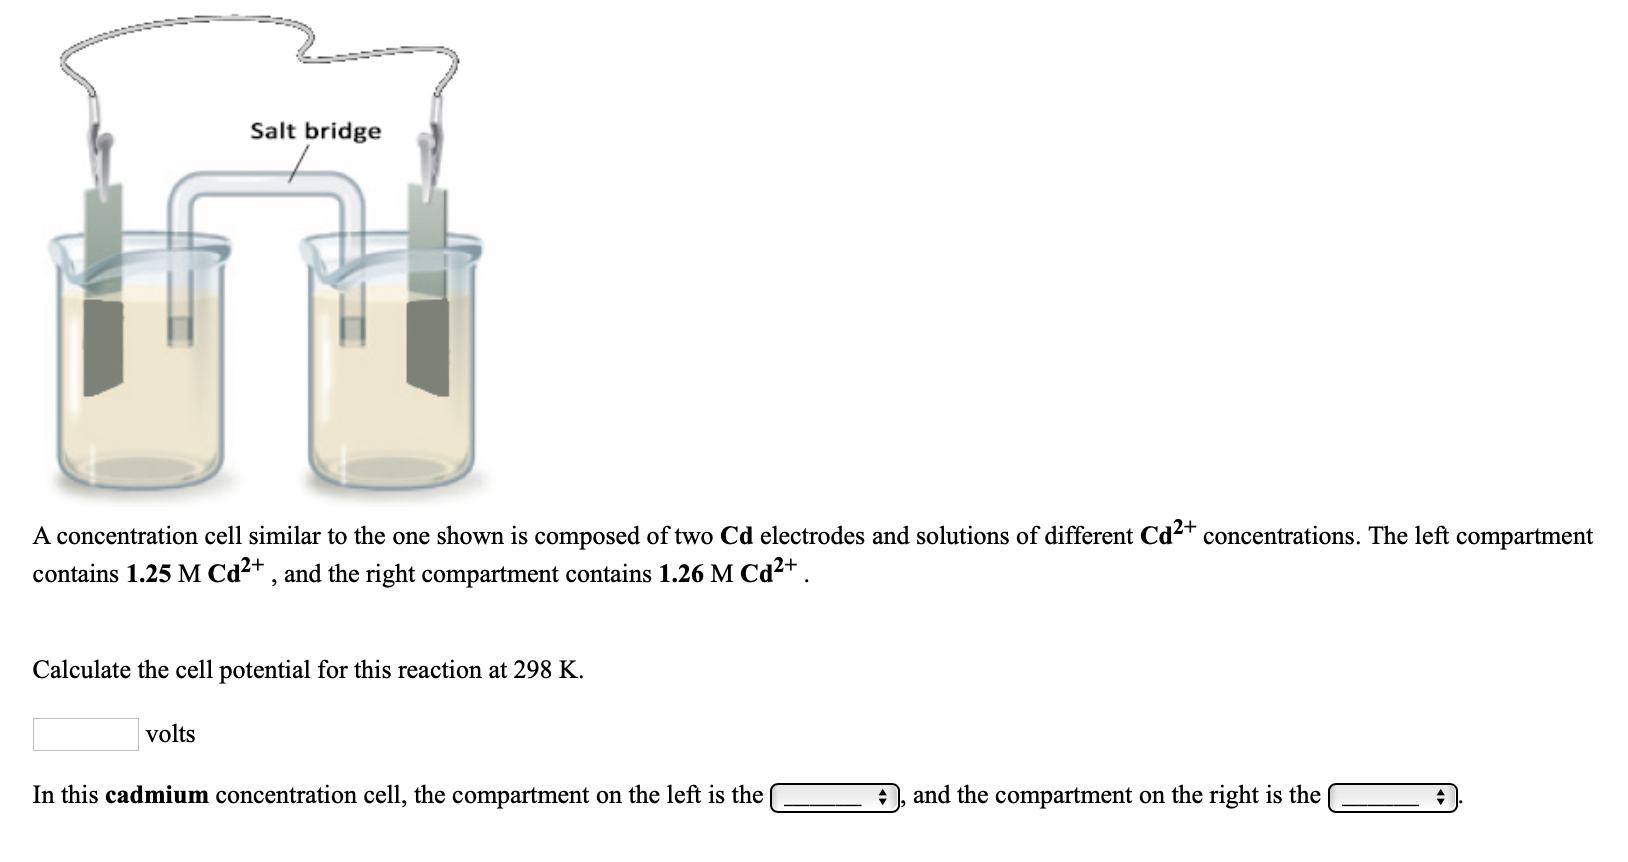 Salt bridge
A concentration cell similar to the one shown is composed of two Cd electrodes and solutions of different Cd2+ concentrations. The left compartment
contains 1.25 M Cd²+ , and the right compartment contains 1.26 M Cd²+ .
Calculate the cell potential for this reaction at 298 K.
volts
In this cadmium concentration cell, the compartment on the left is the
and the compartment on the right is the
